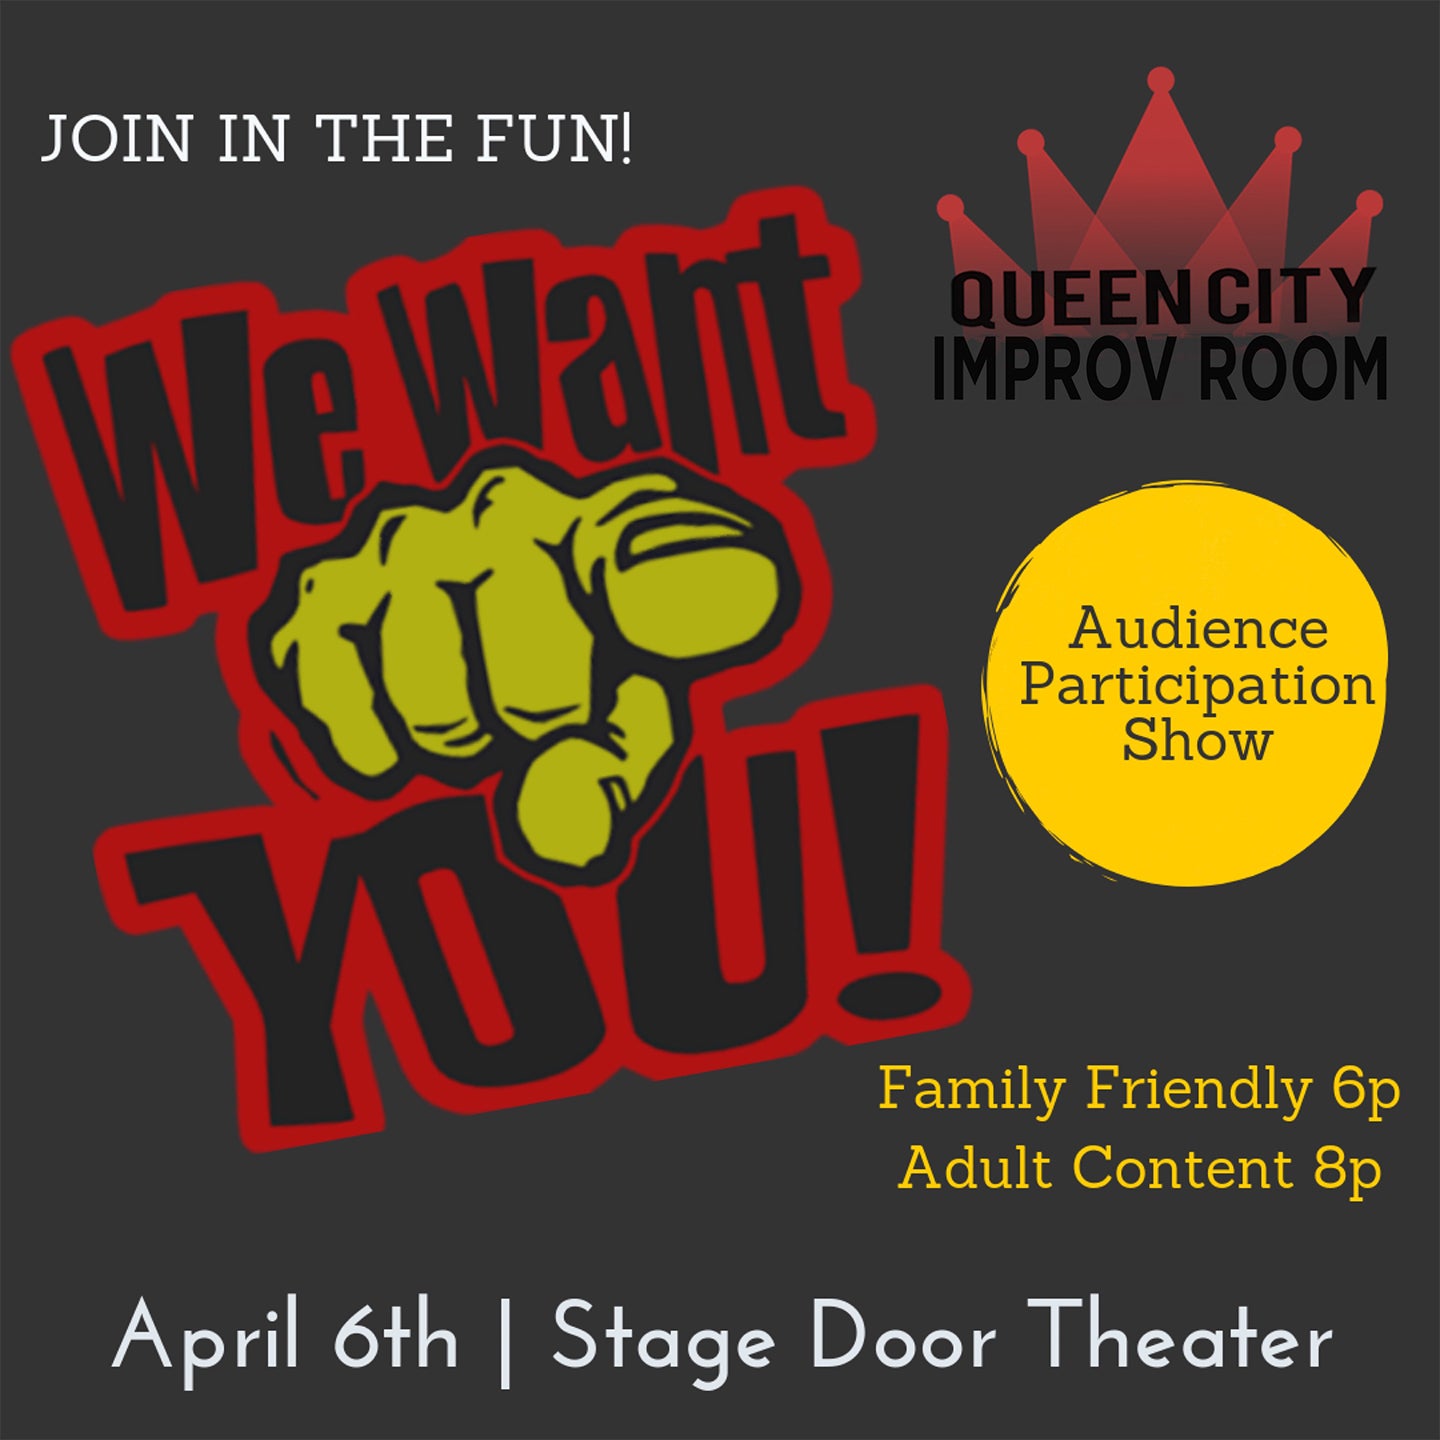 Queen City Improv Room: Audience Participation